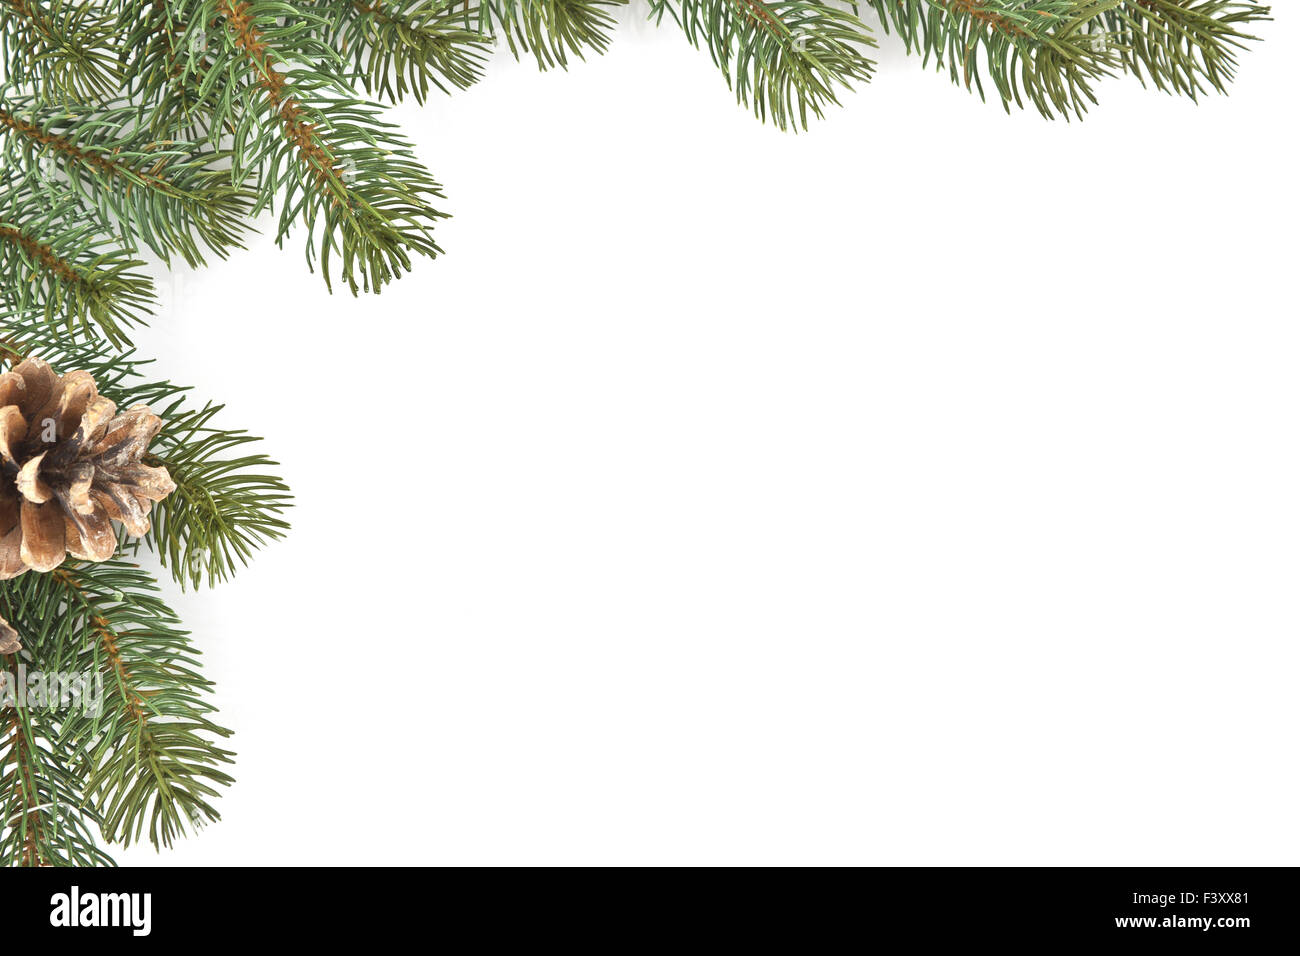 Spruce branches on White Background Stock Photo